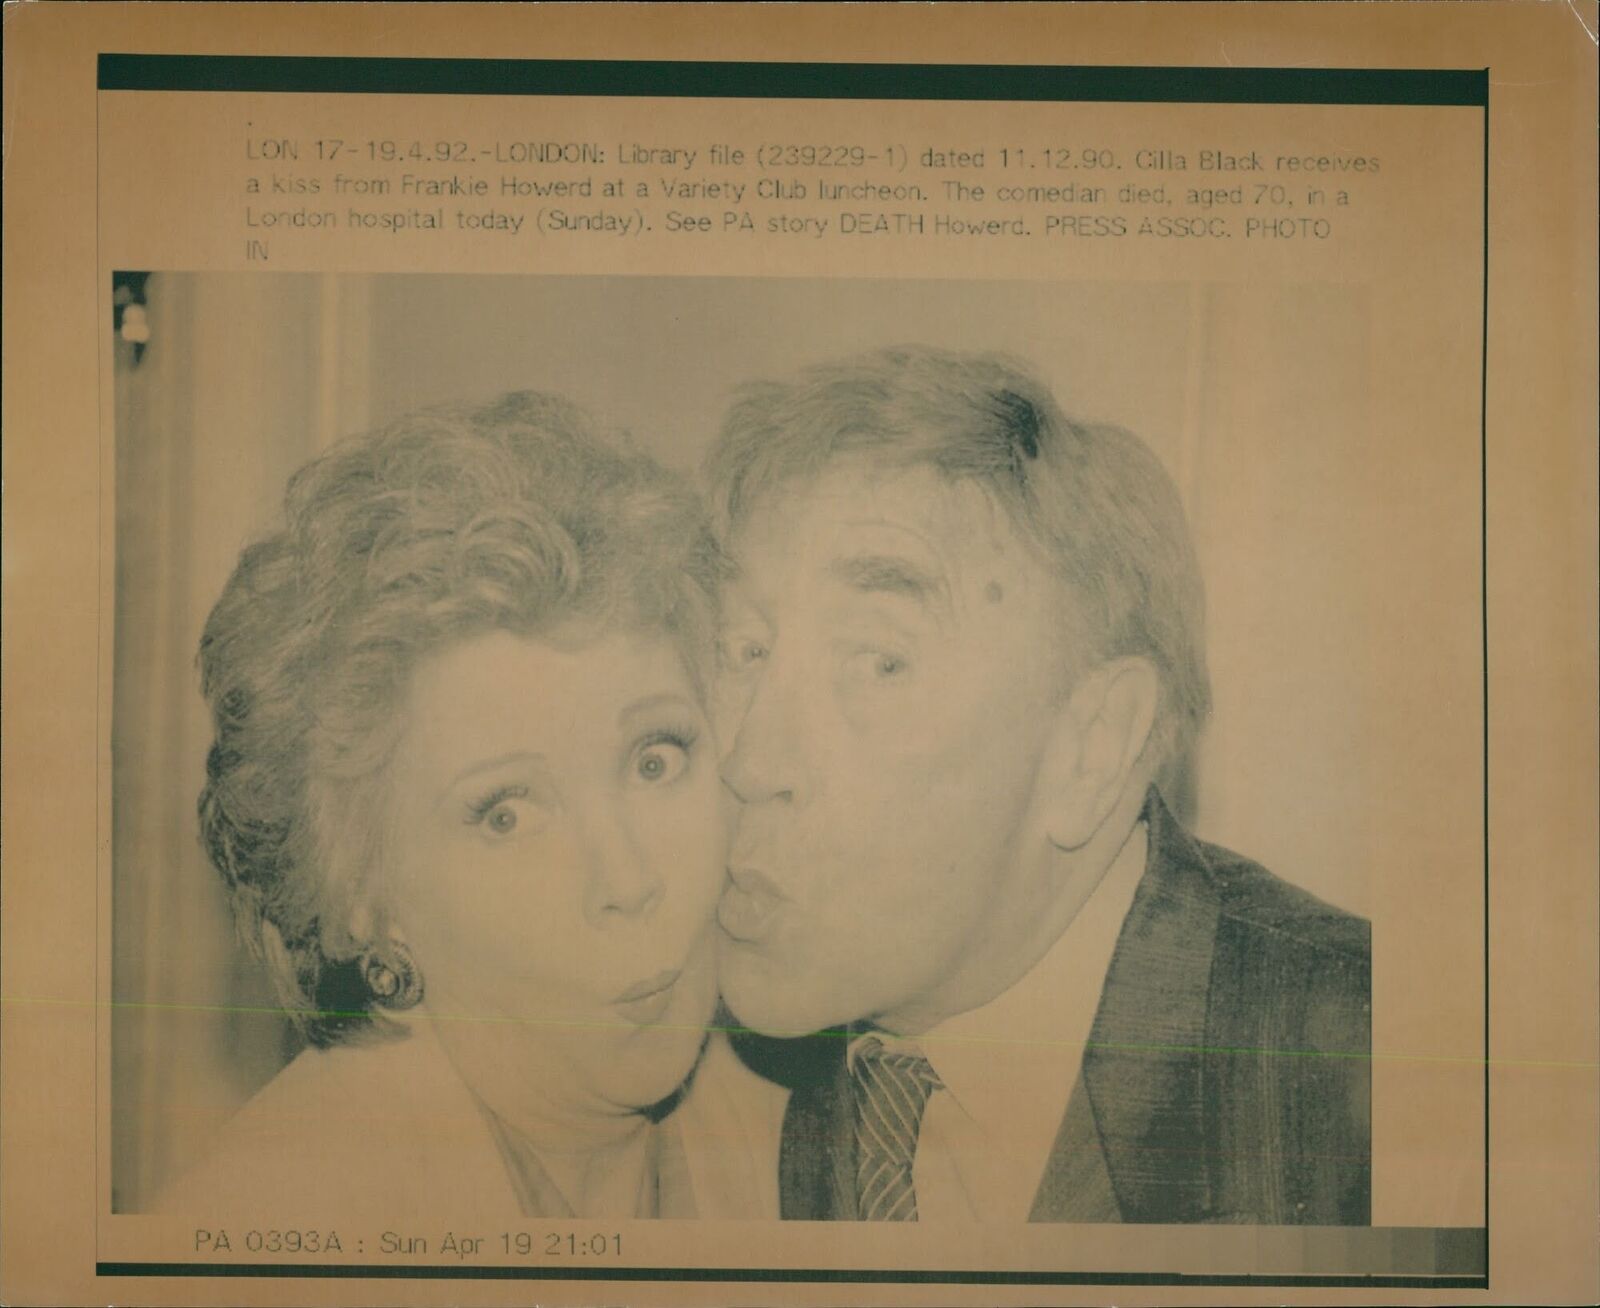 Cilla Black receives a kiss from comedian Frank... - Vintage Photograph 1315448